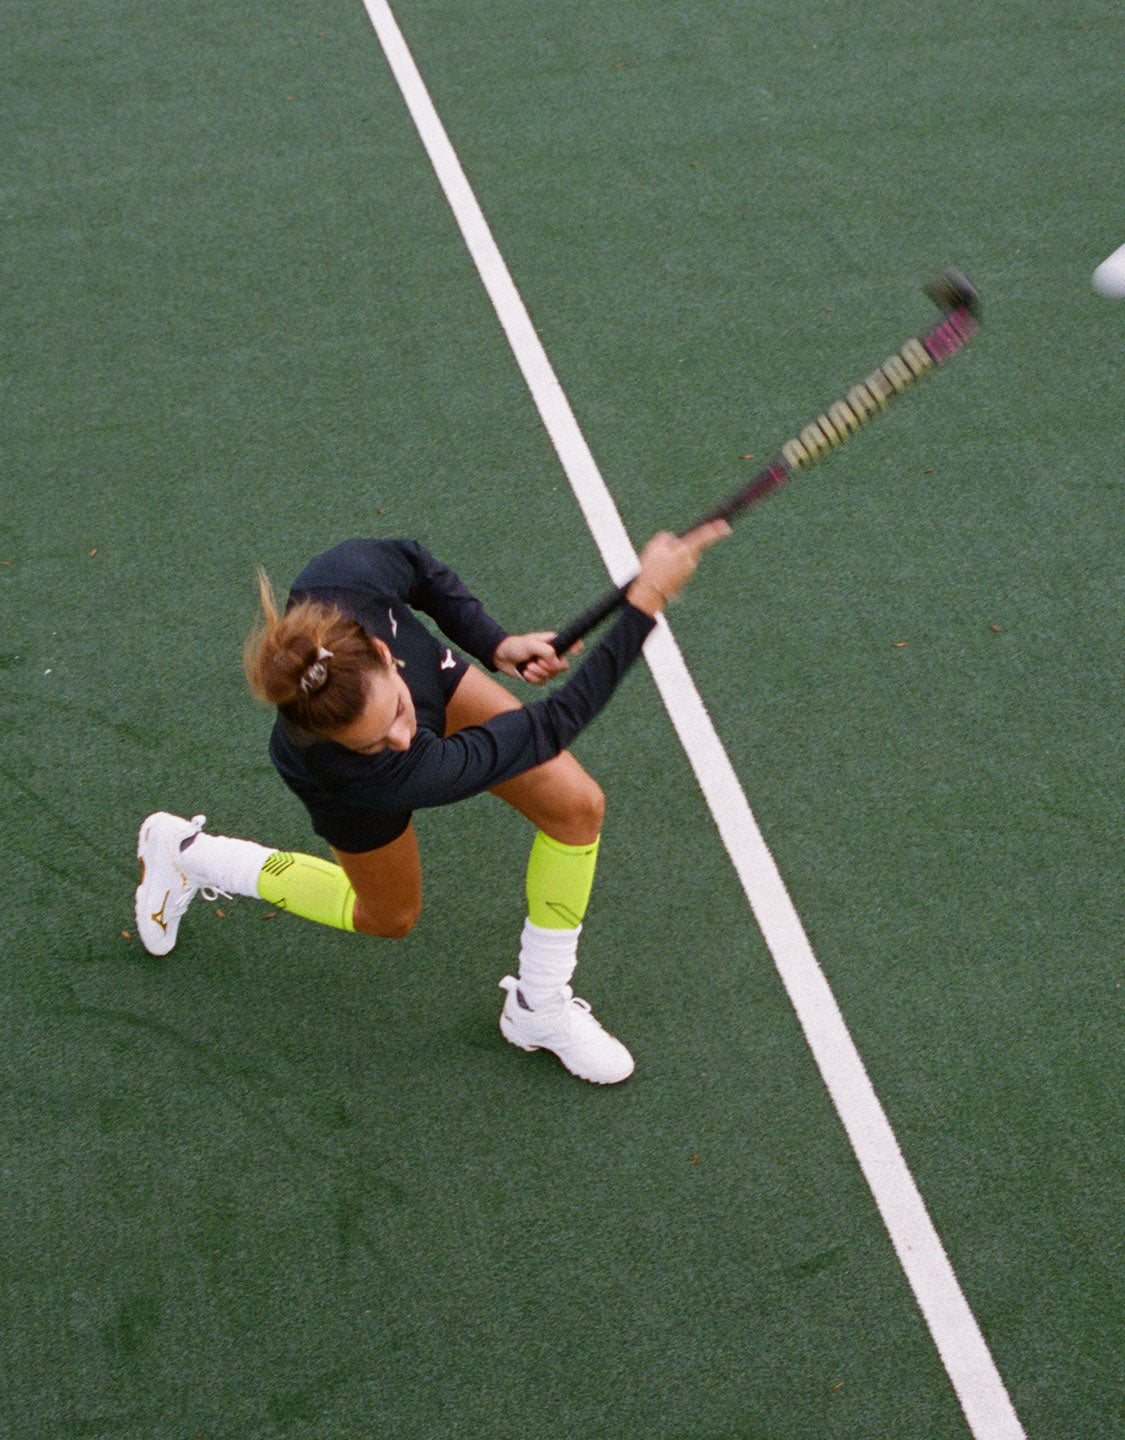 Field hockey player on field in action seen from above.